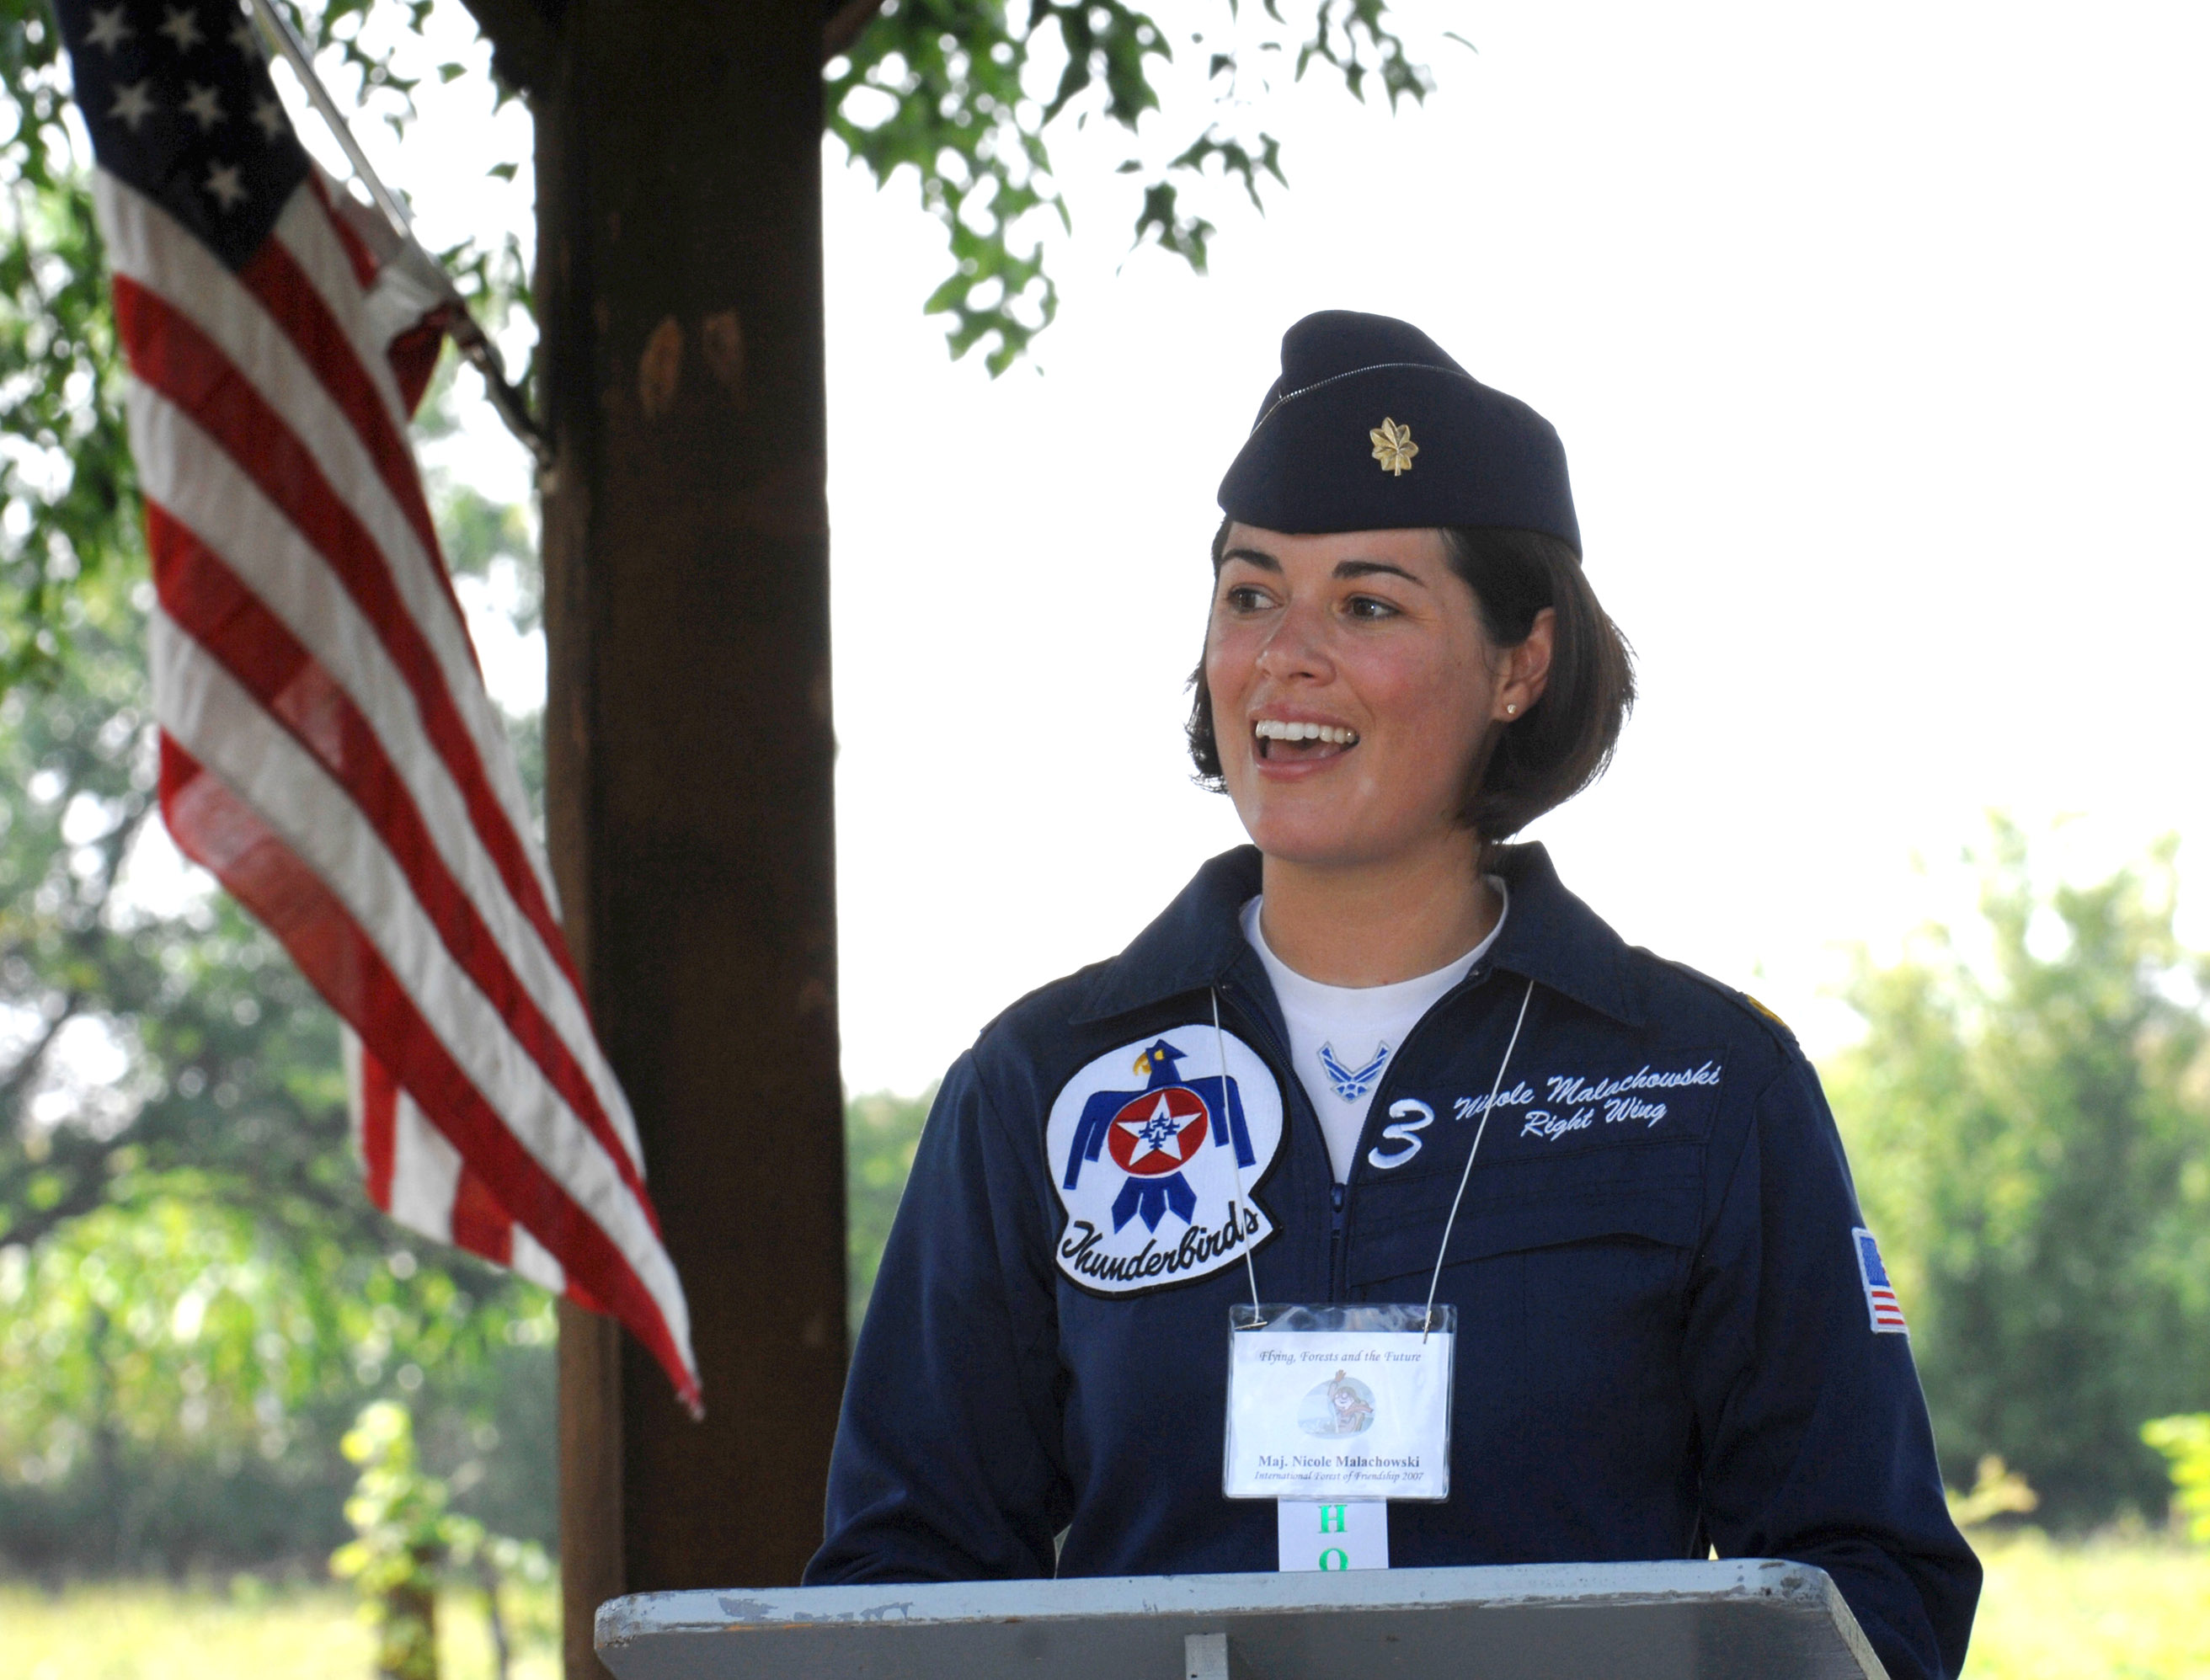 Image result for Nicole Malachowski (The USA Air Force)